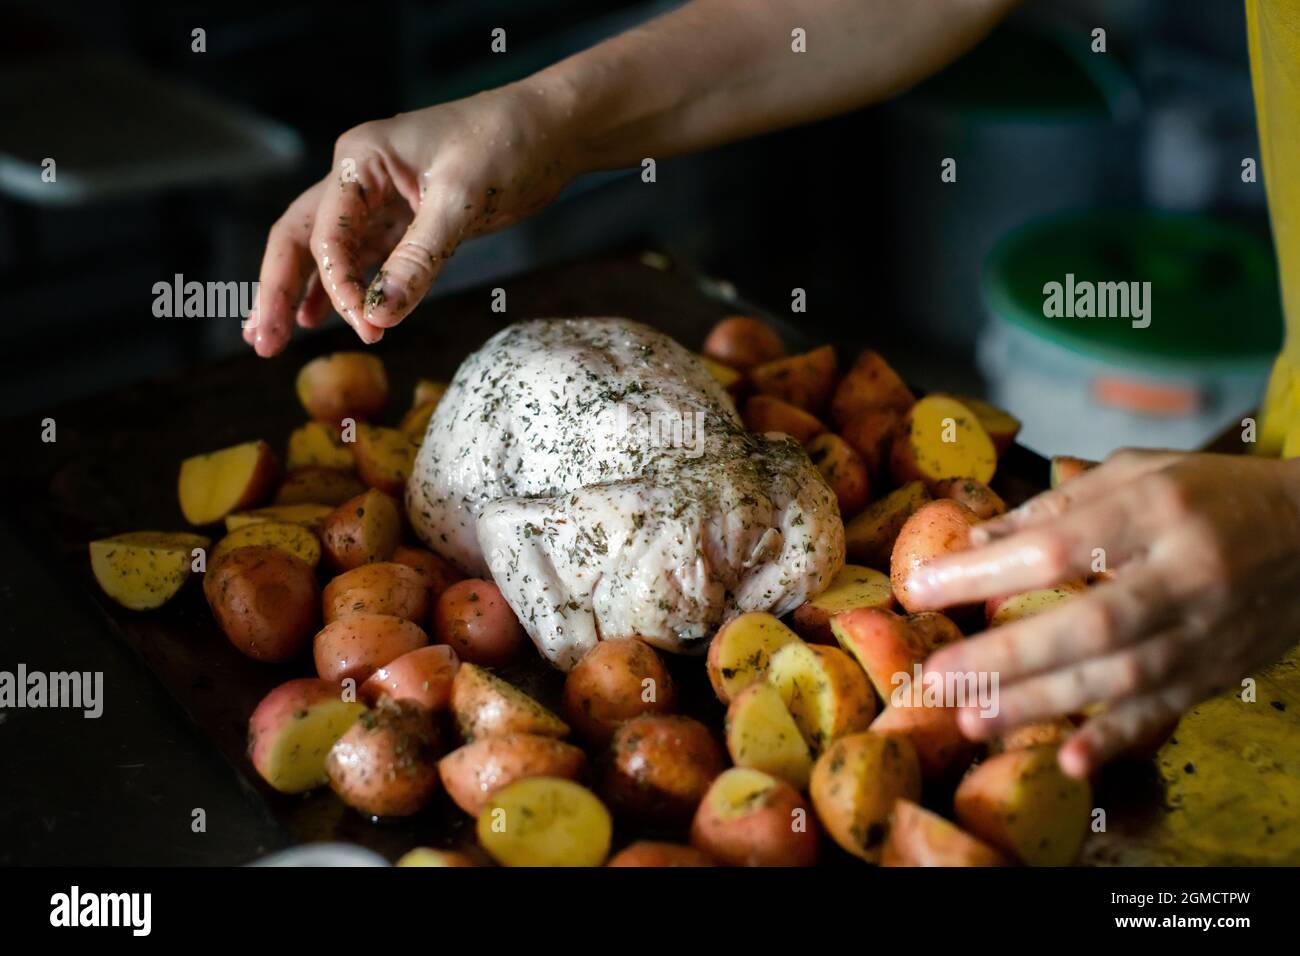 Cooking chicken baked with potatoes Stock Photo